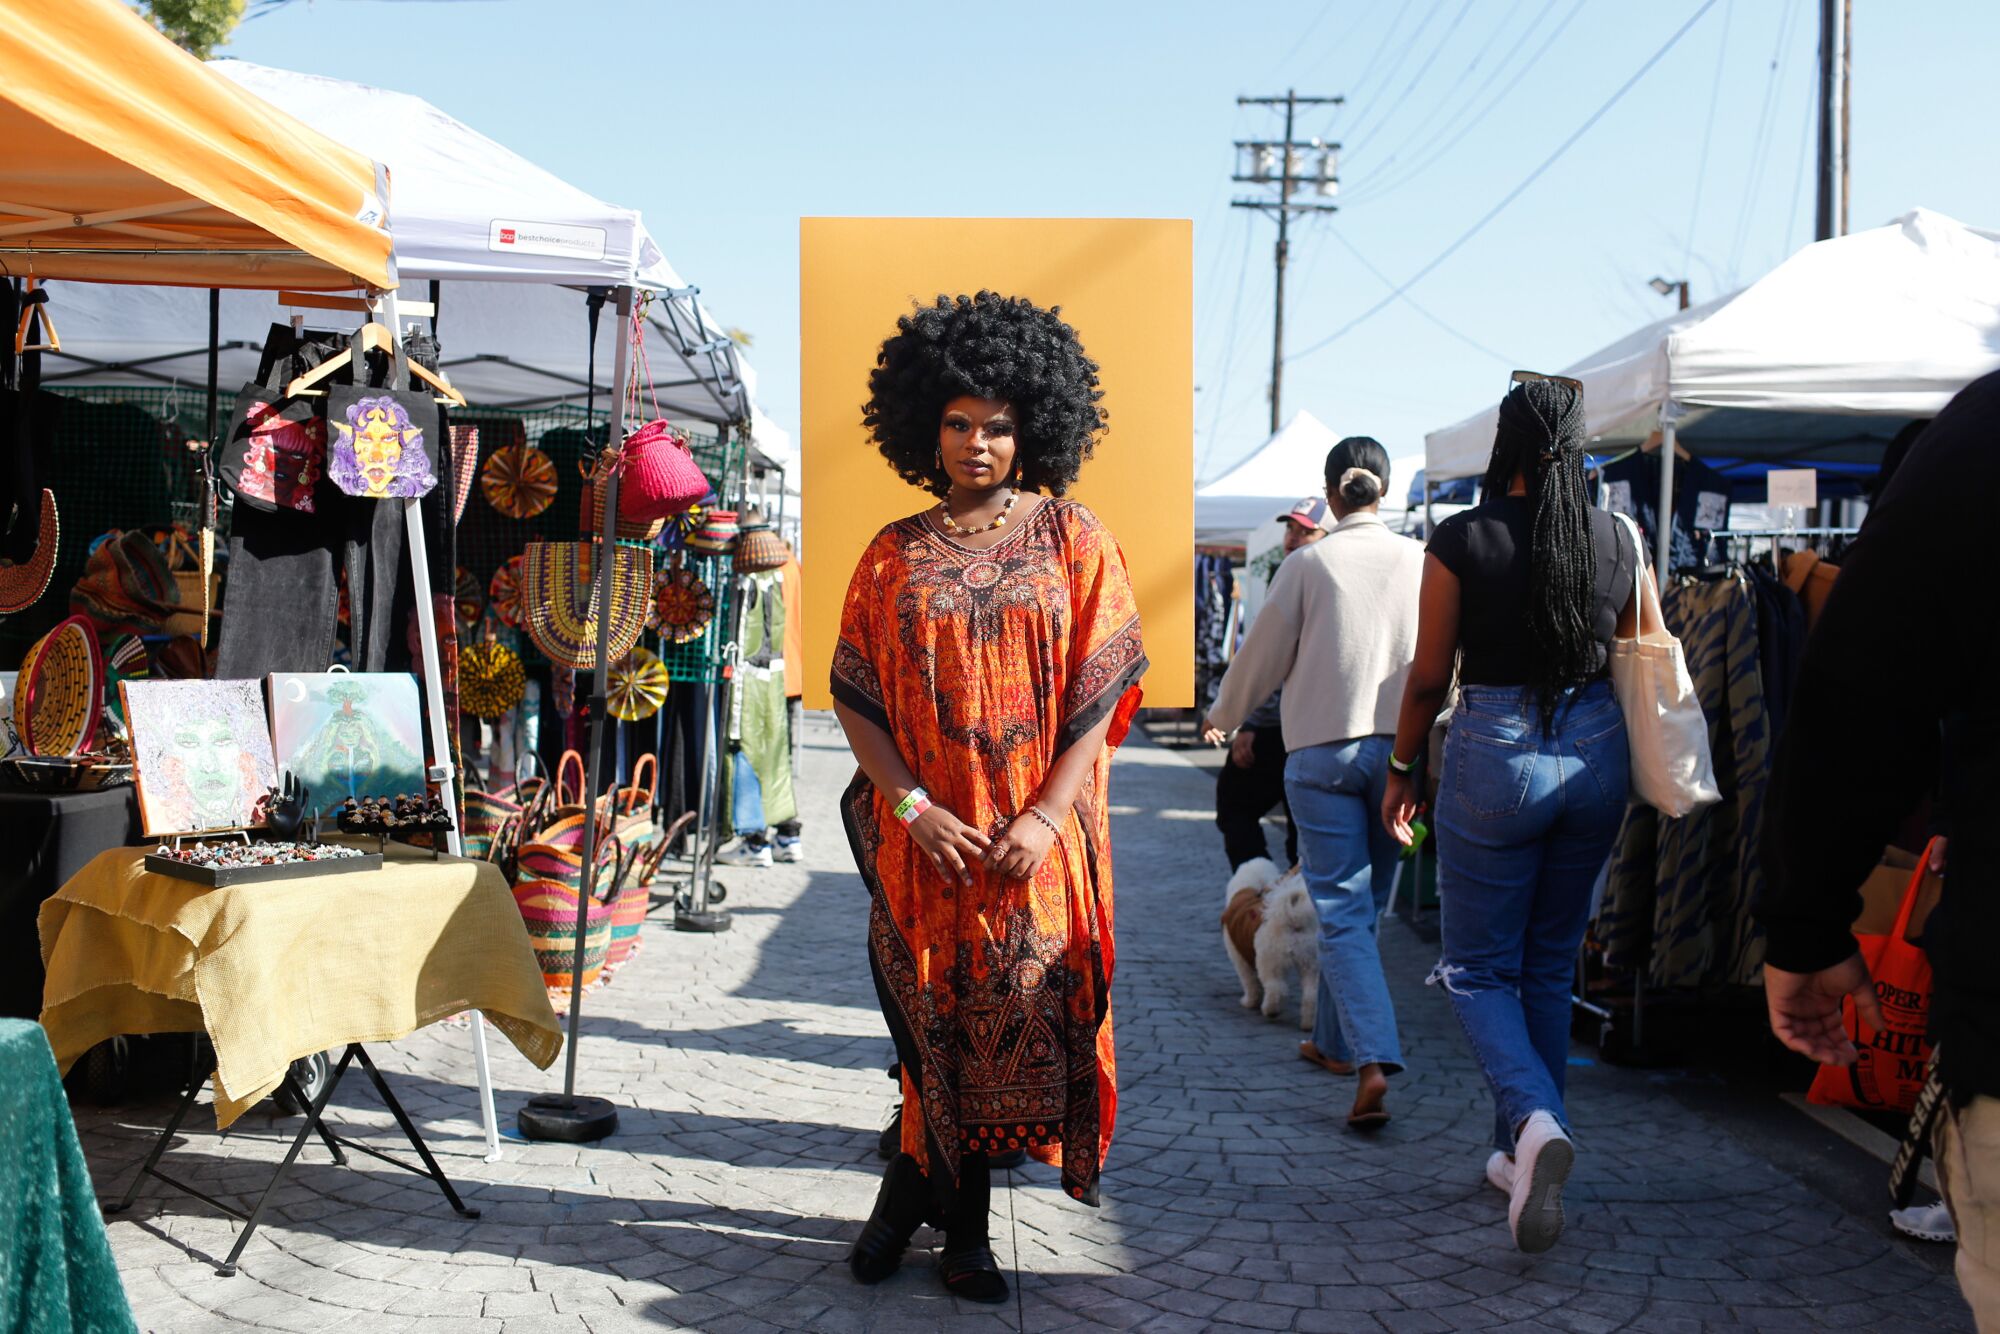 Adanya Fleming poses for a portrait while attending Black Market Flea held at the Beehive